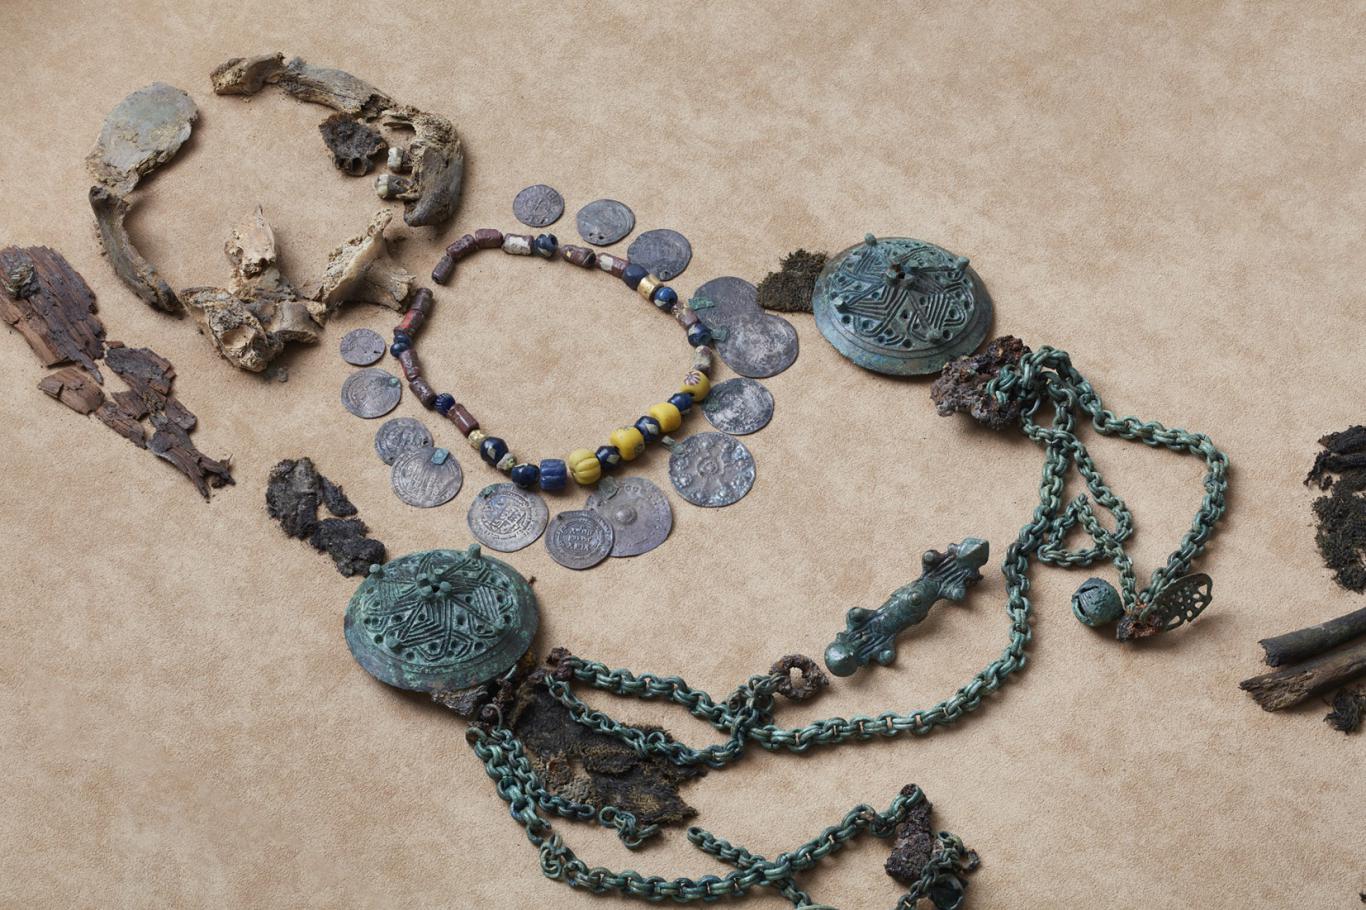 Grave goods from the Eura woman's grave (no. 56)